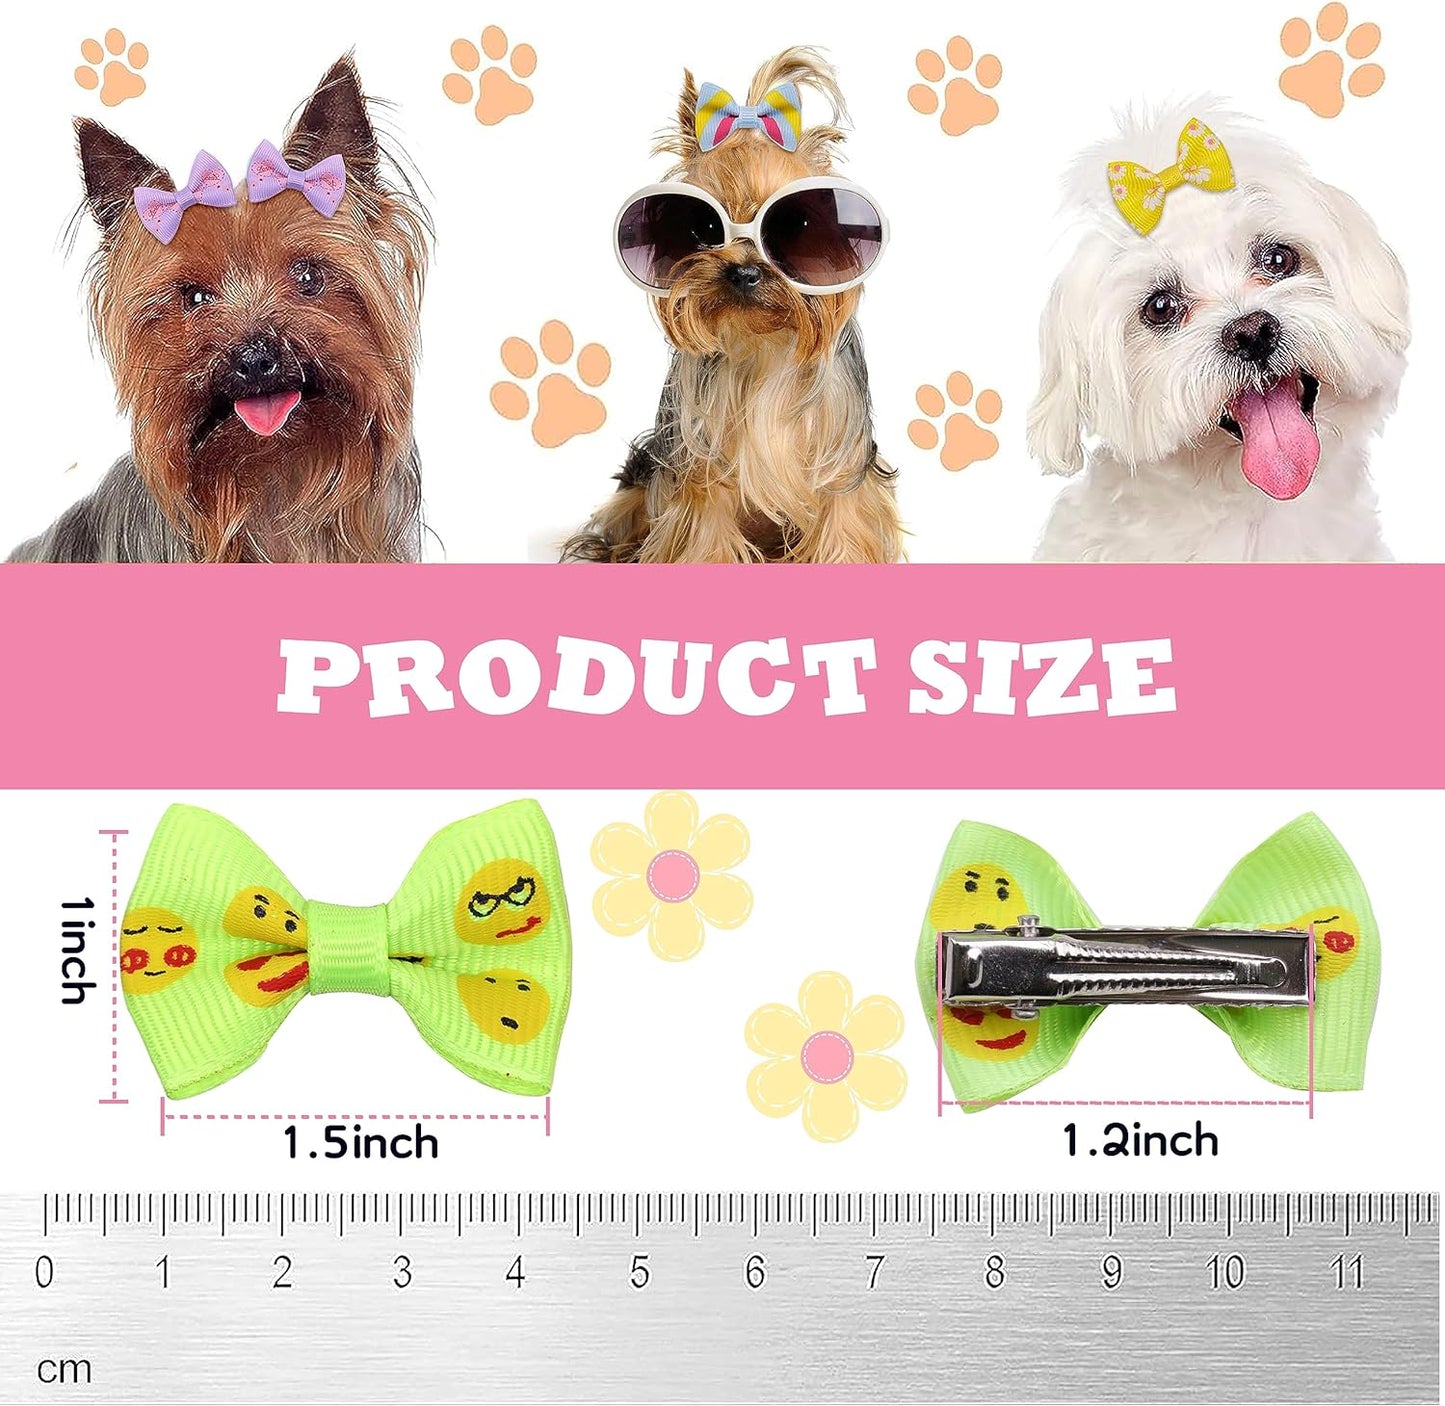 Dog Hair Bows for Small Dogs- 60 Piesces Handmade Hair Clips with Clips, Pet Grooming Accessories for Yorkies